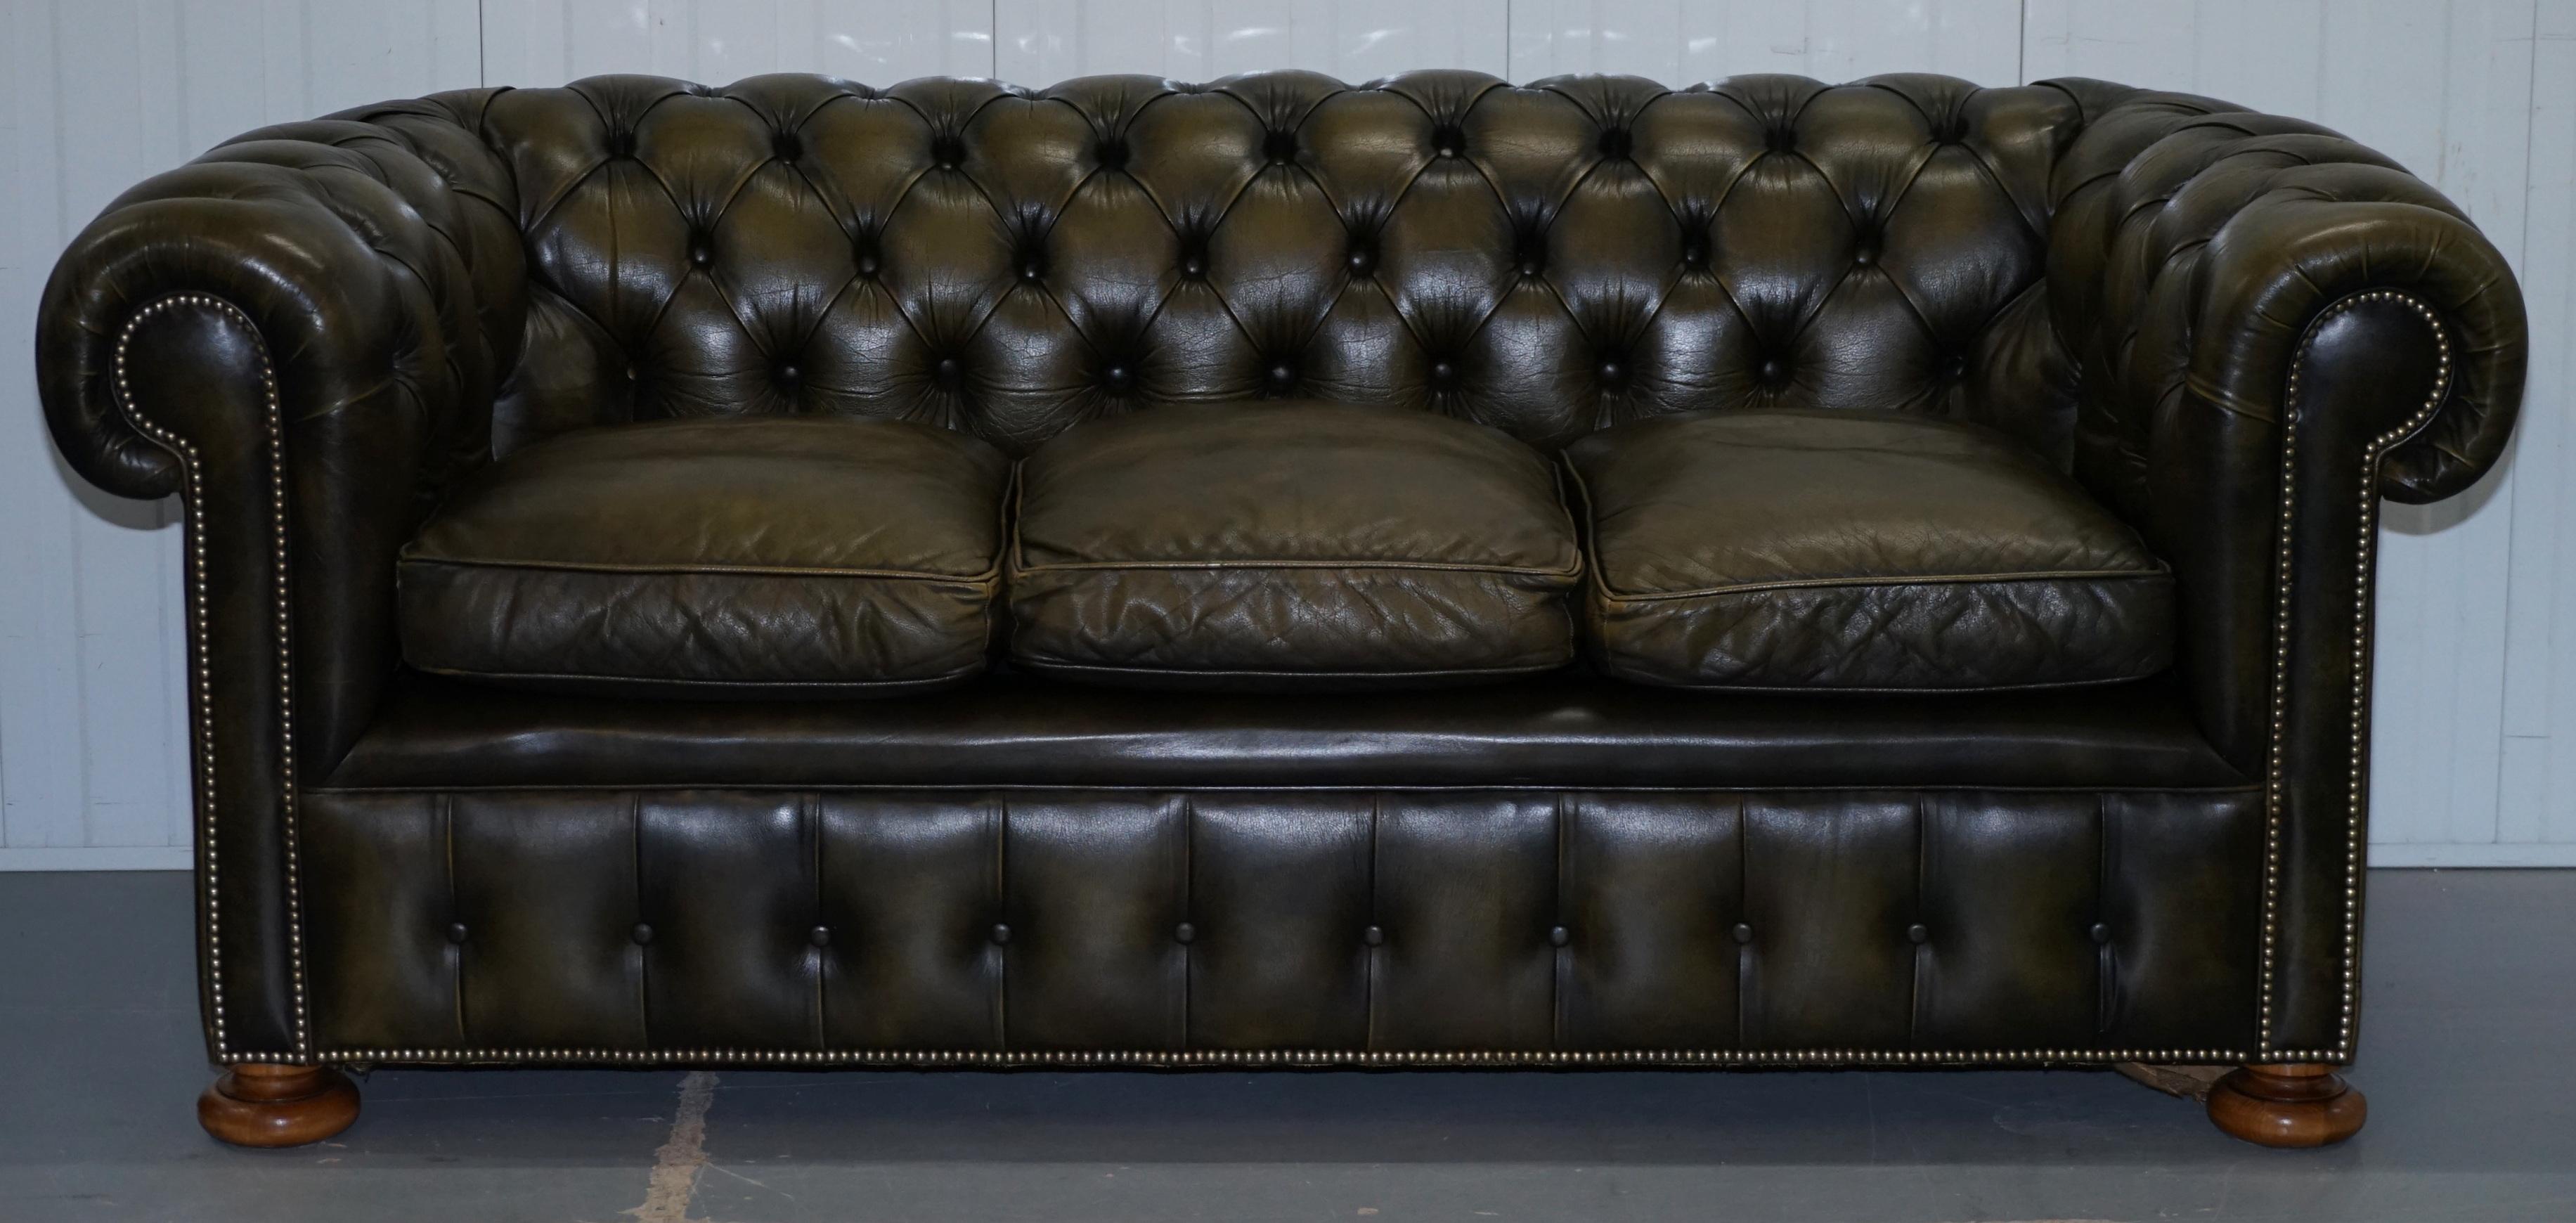 We are delighted to offer for sale this stunning pair of exceptional 1950s hand dyed Luxury Chesterfield club sofas with feather filled cushions and a coil sprung base.

It's very rare to find a matching pair of these and especially in this